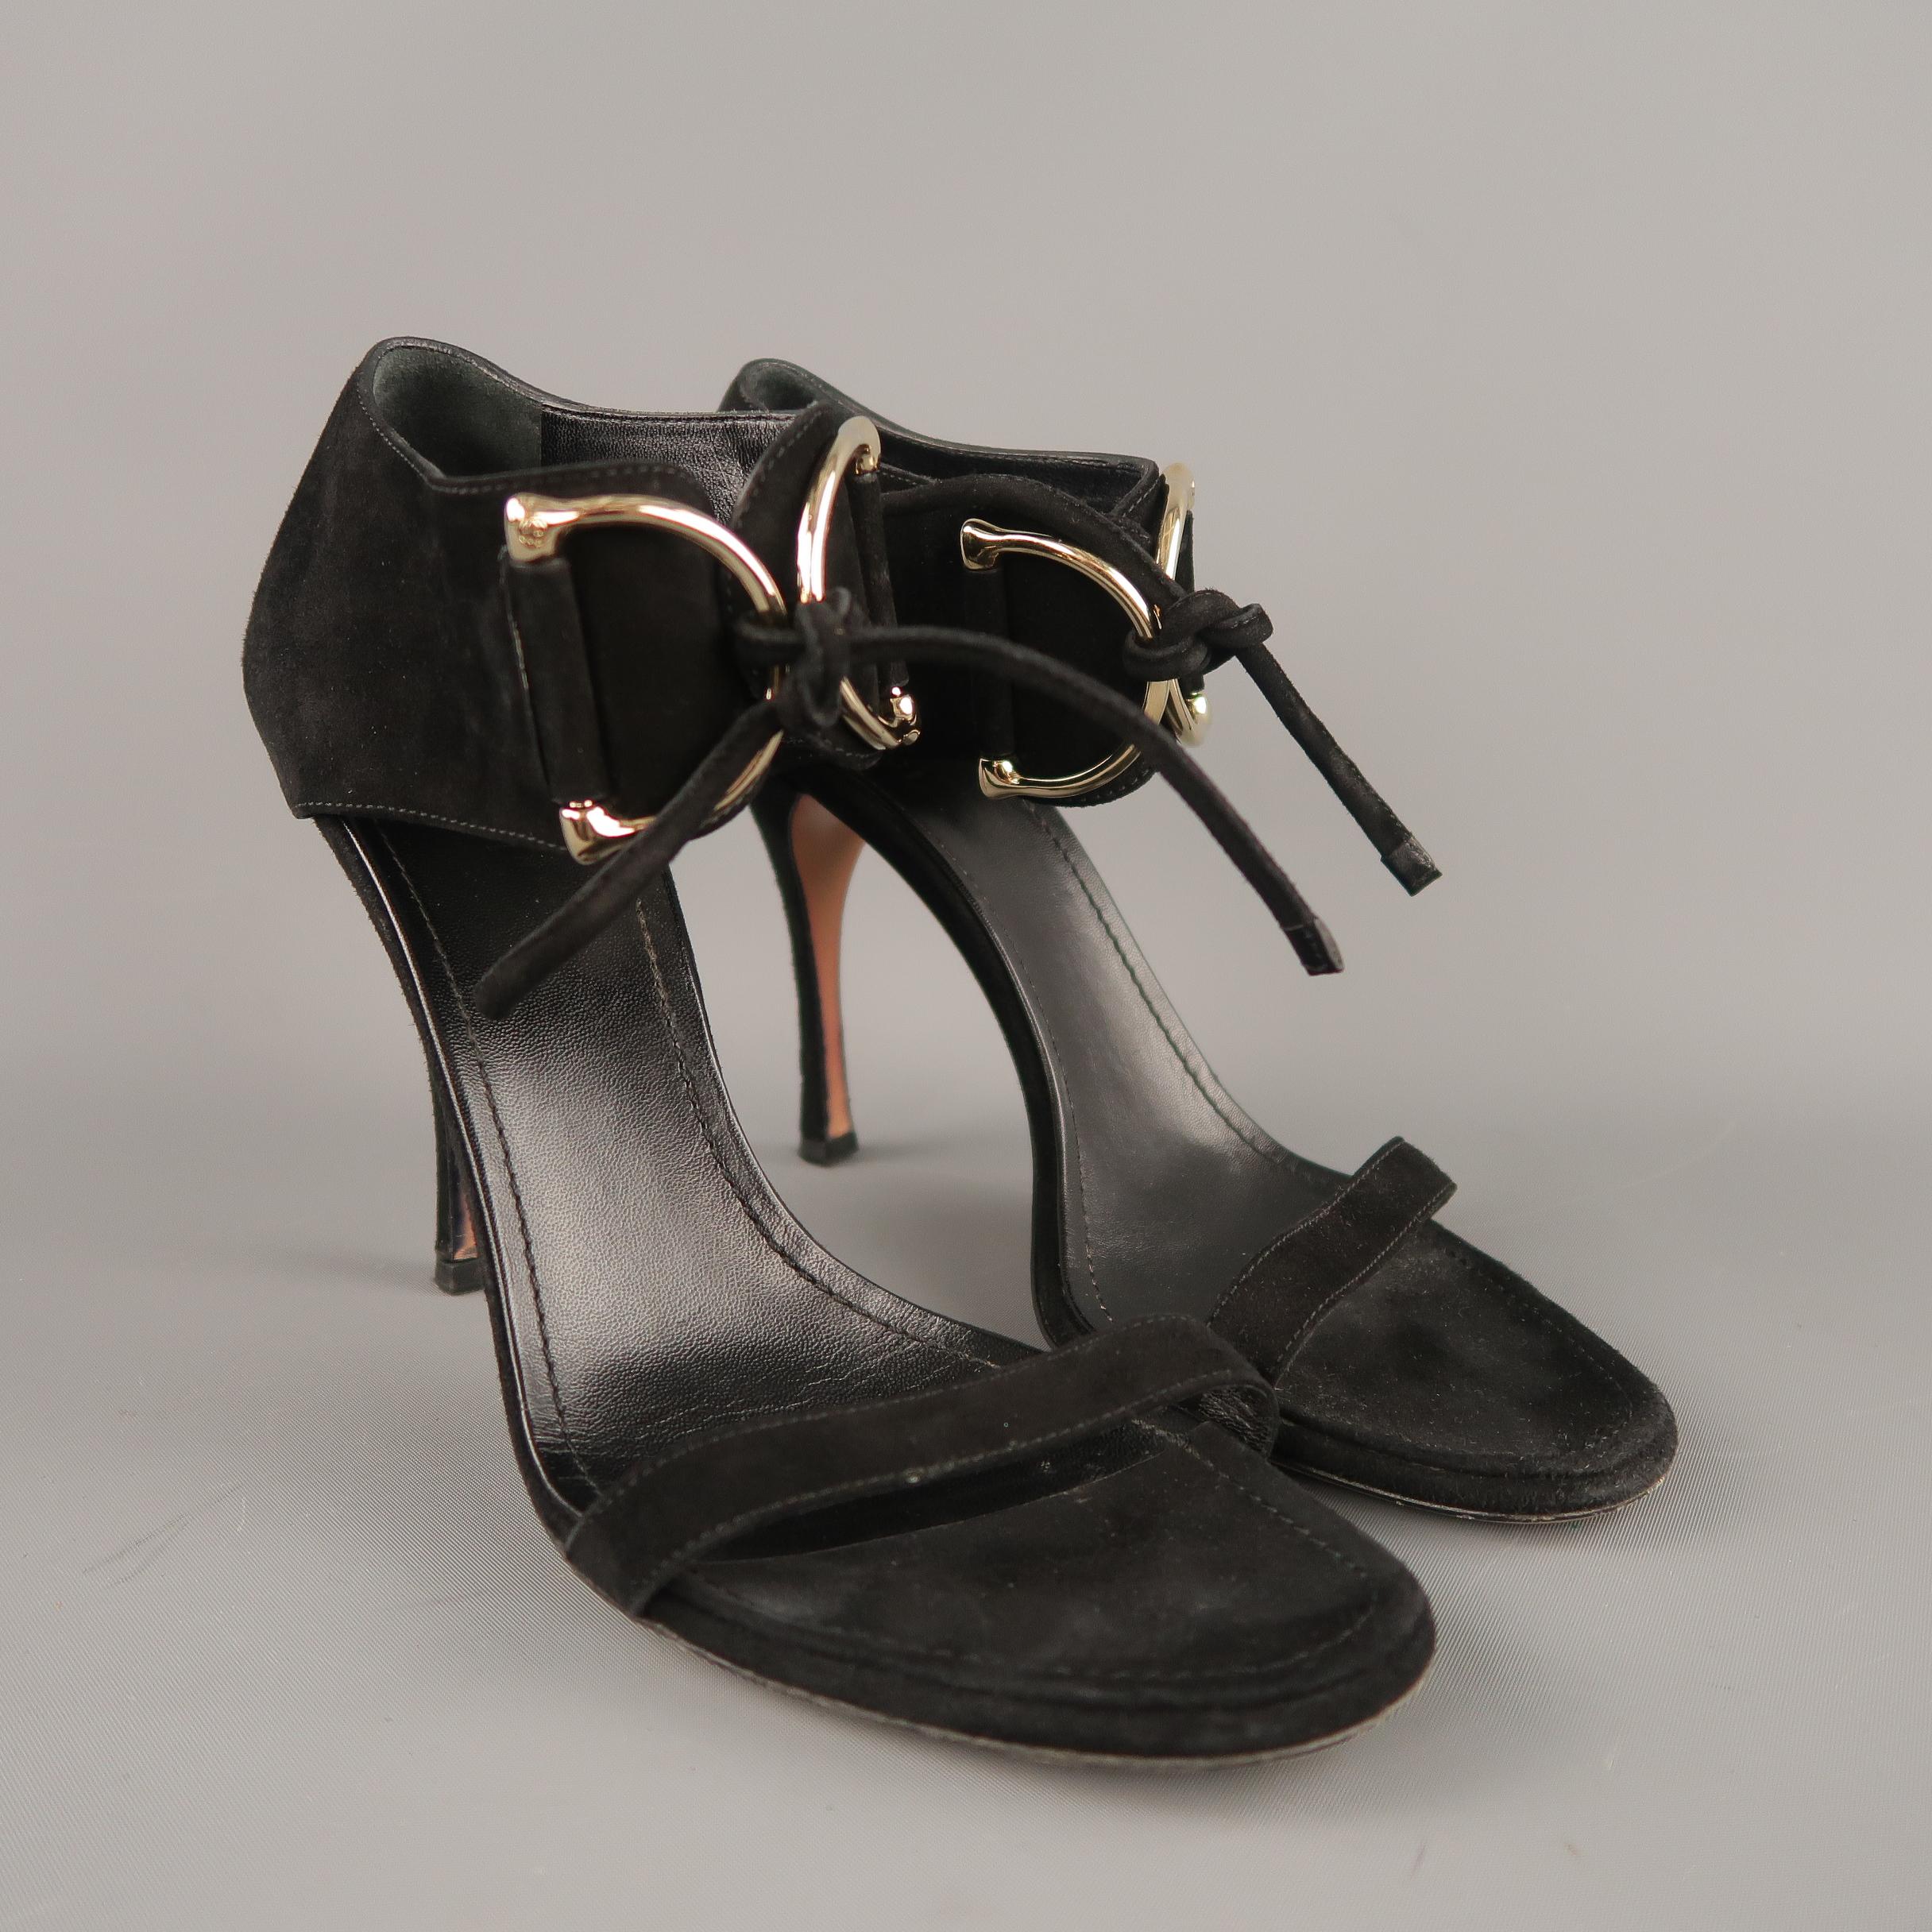 GUCCI sandals come in black suede with a thin toe strap, covered stiletto heel, and thick ankle strap, detailed with oversized, embossed D loops with tie closure. With dust bag. Made in Italy.
 
Very Good Pre-Owned Condition.
Marked: UK 9B
